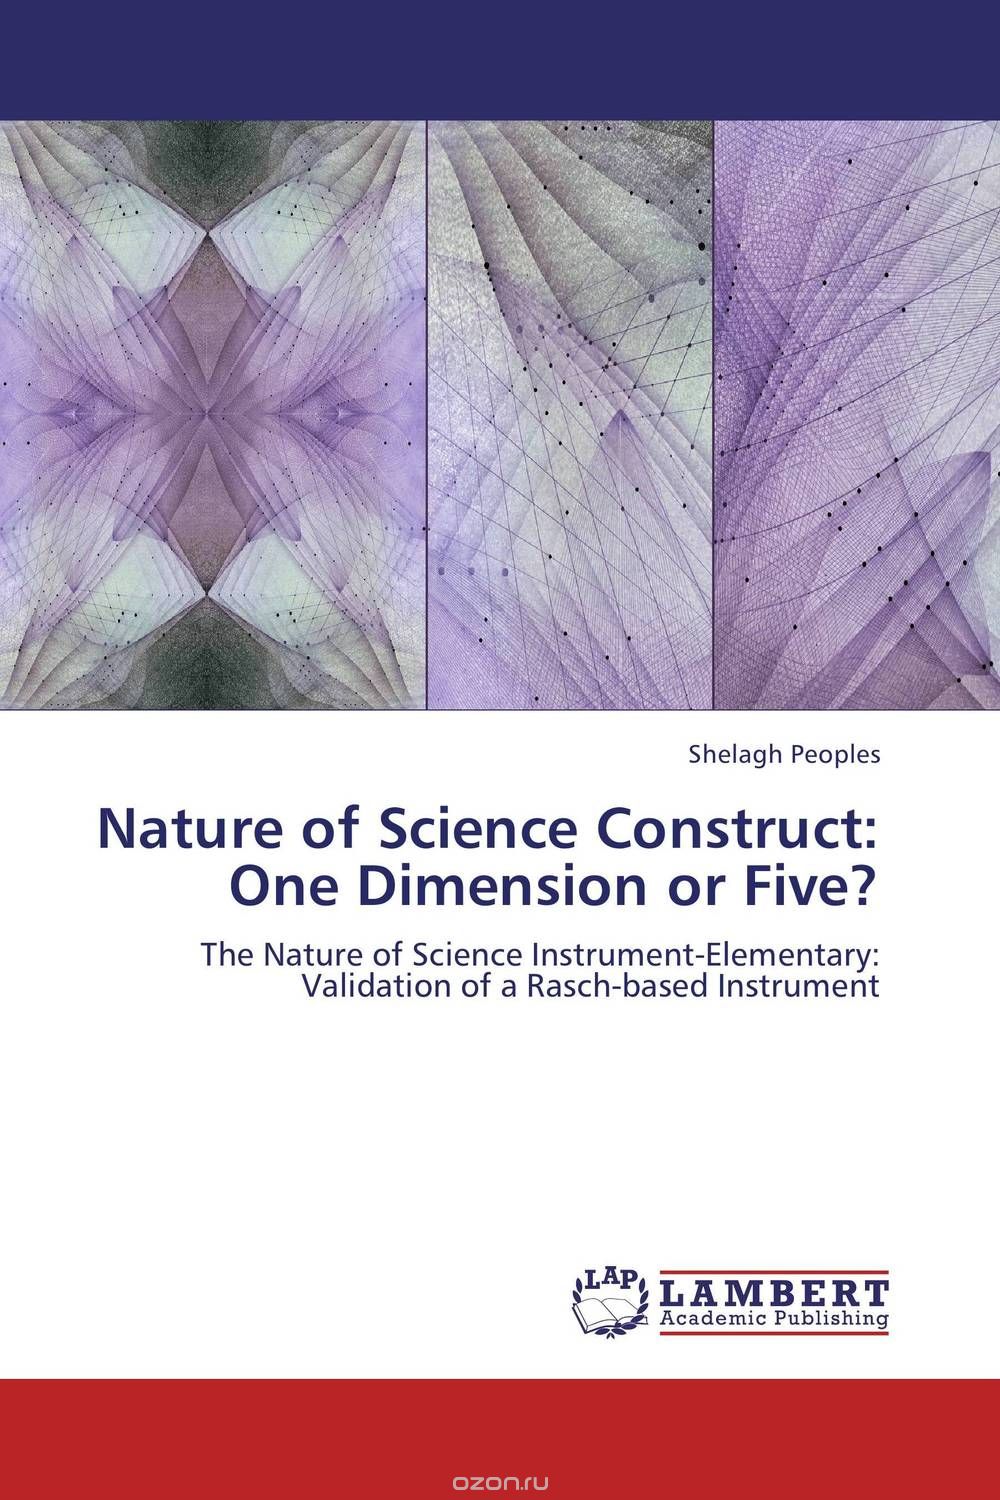 Скачать книгу "Nature of Science Construct: One Dimension or Five?"